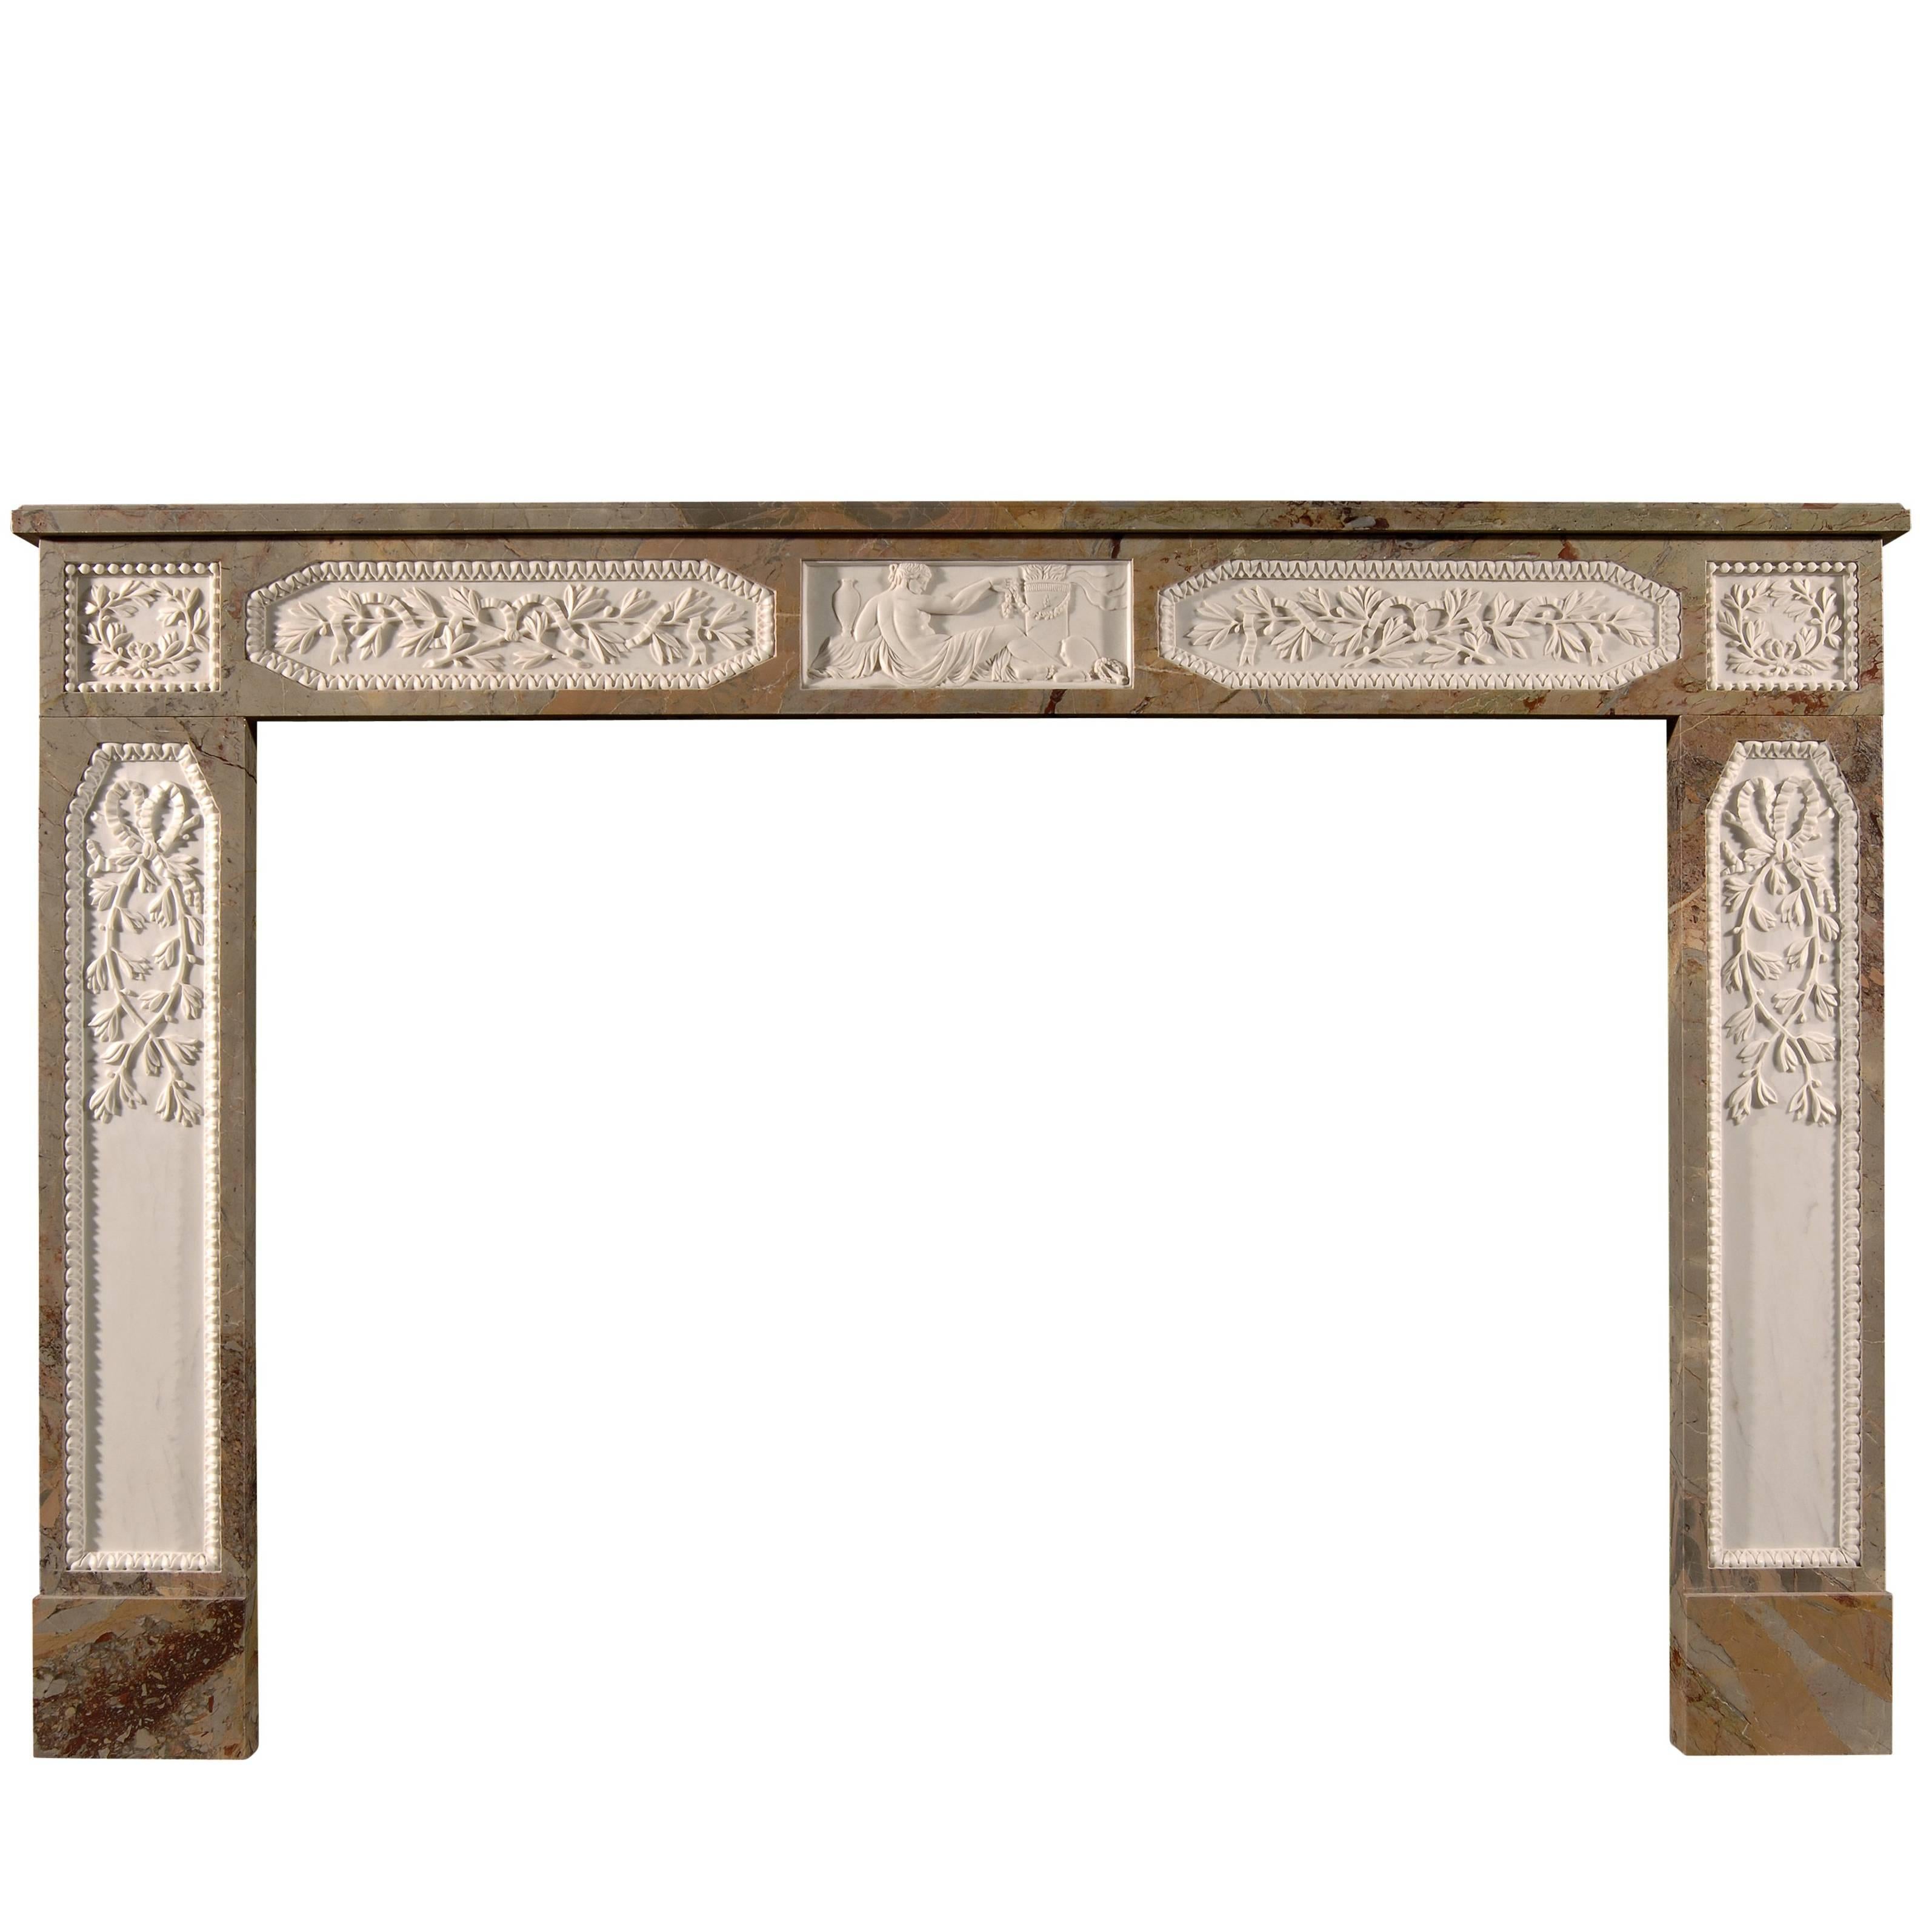 Sarrancolin French Louis XVI Style Marble Fireplace For Sale